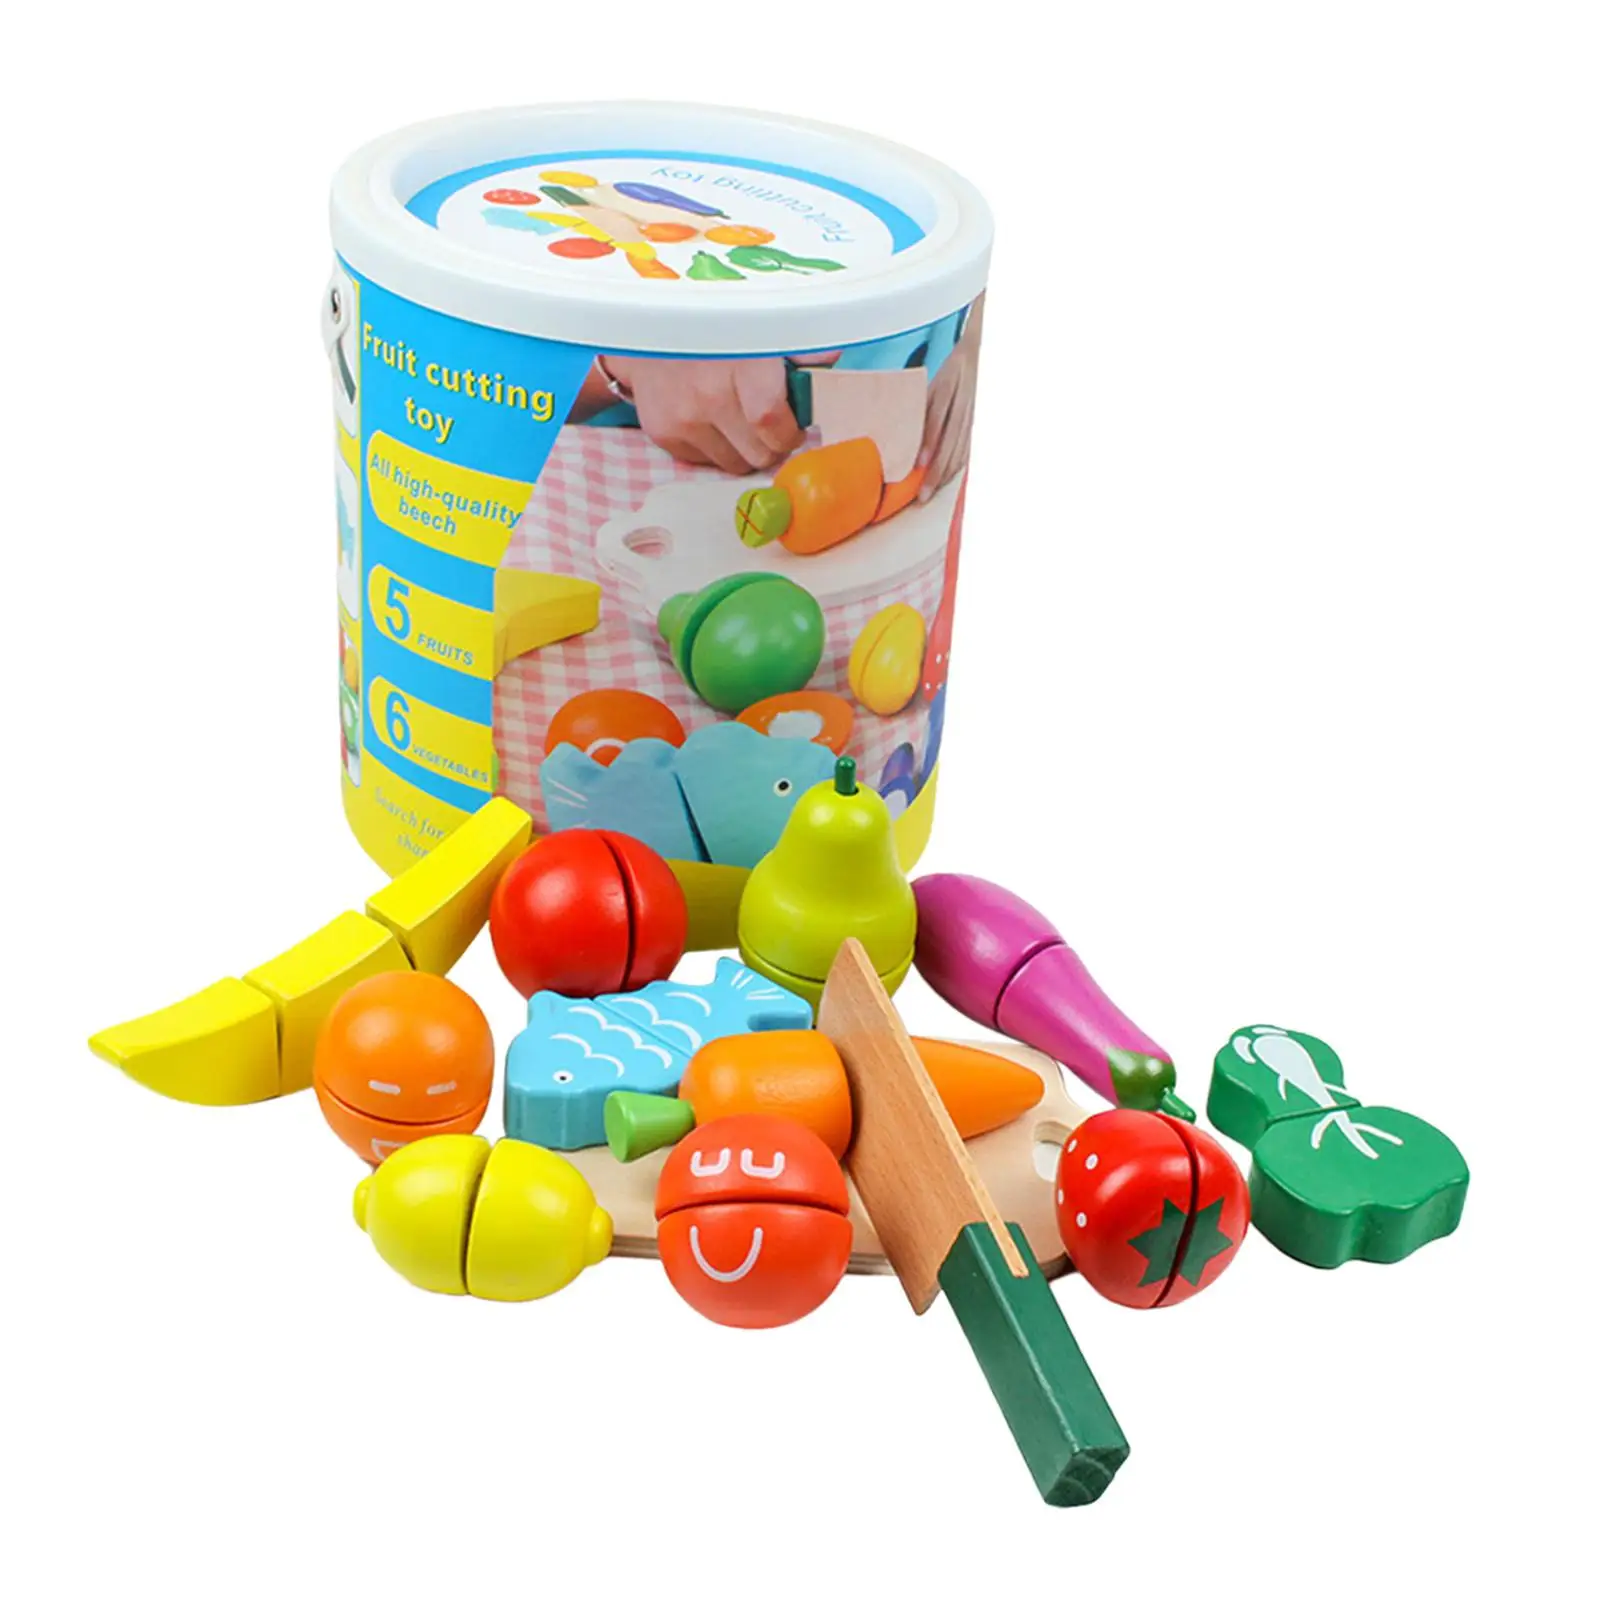 Play Food Toy Role Playing Early Learning Educational Pretend Kitchen Toys for Children Ages 1 2 3 Kids Boy Girl Party Favors